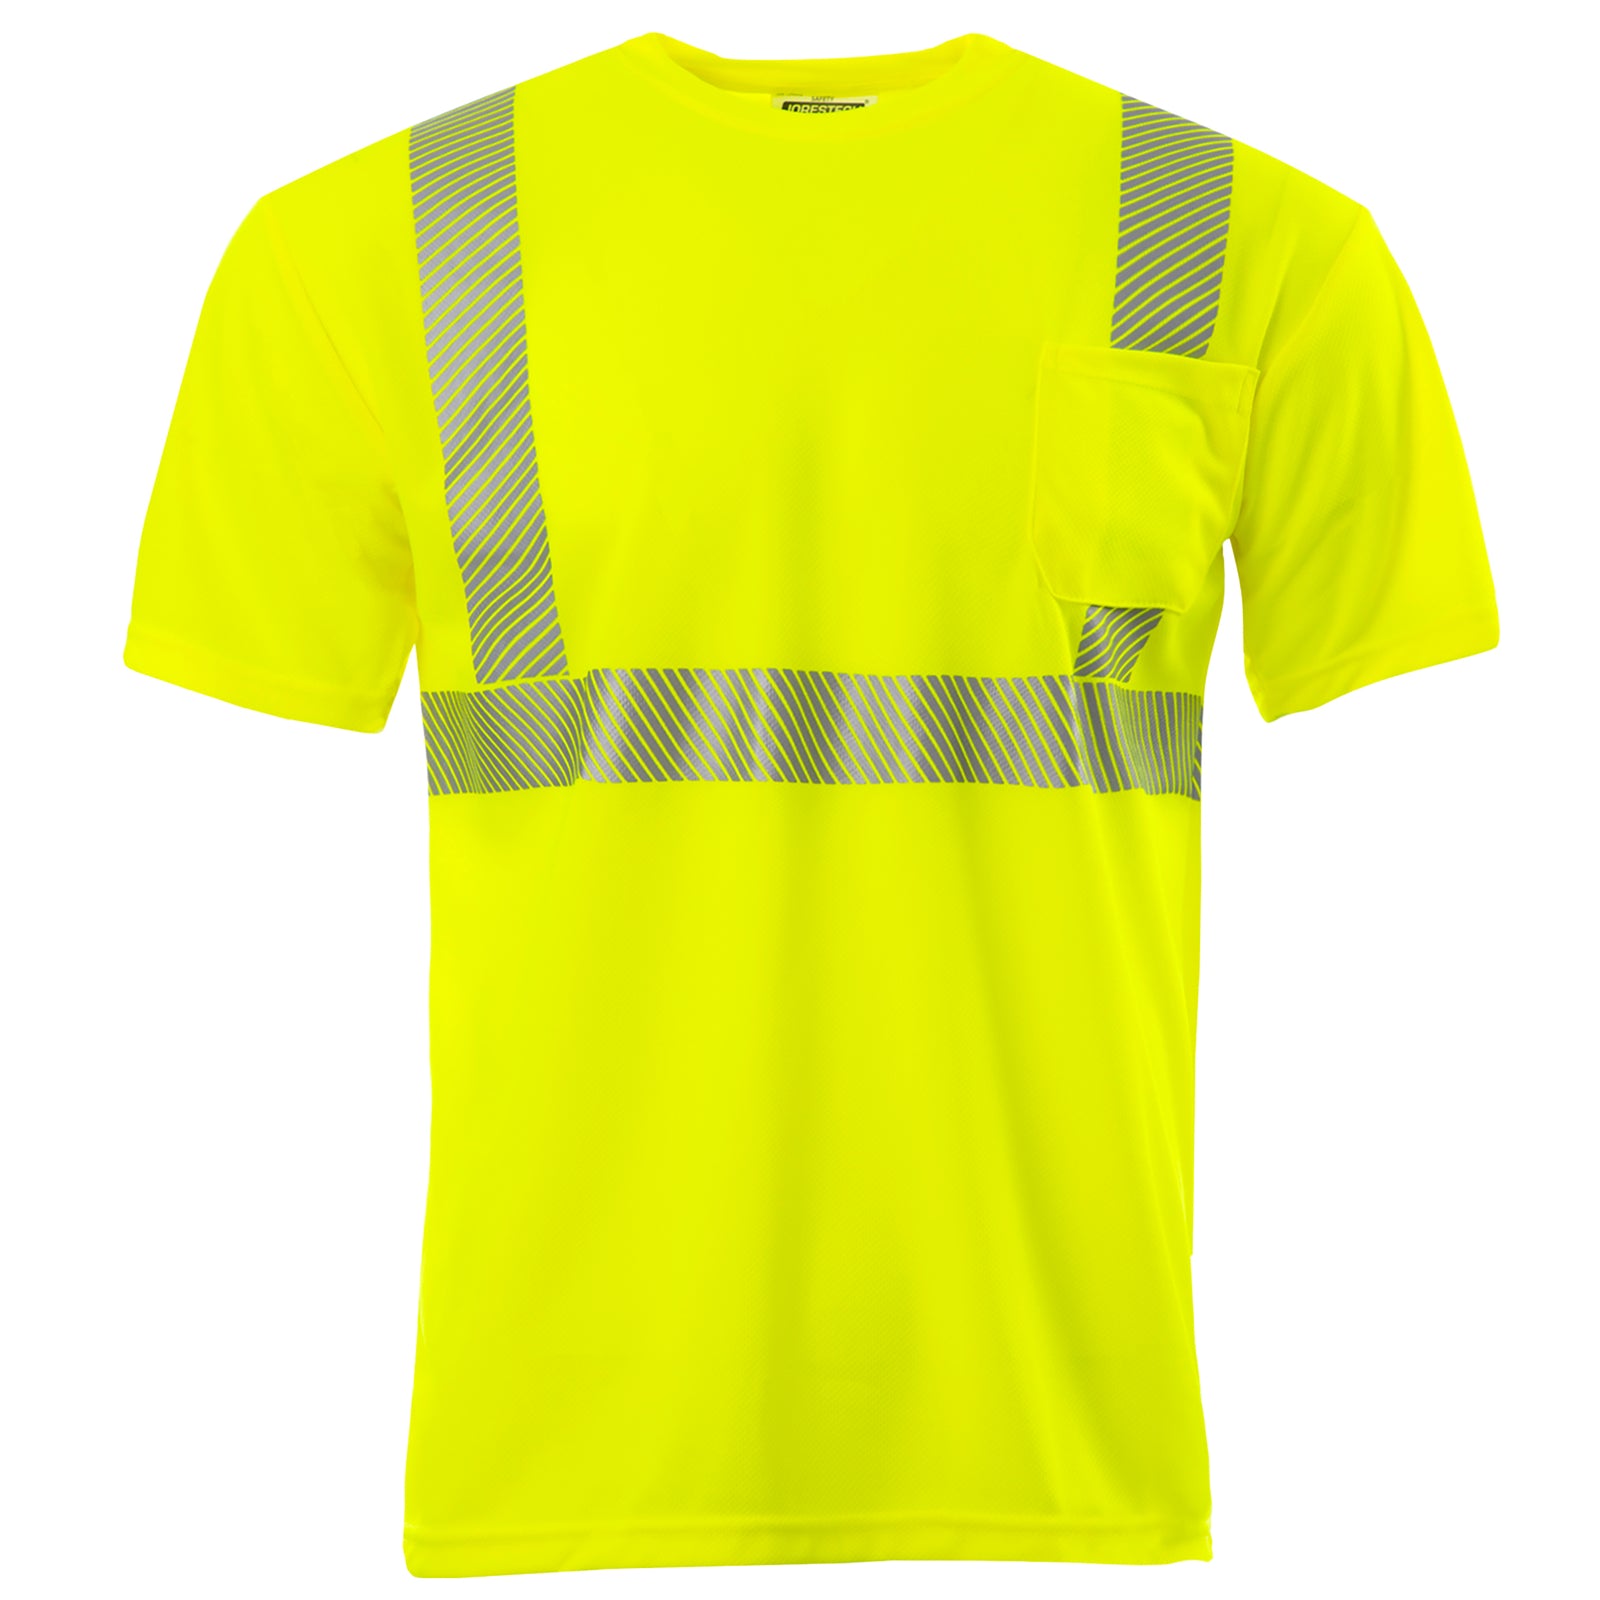 Front view image of the Hi-Vis Lime/Yellow heat transfer reflective safety short sleeve shirt calls 2 type R